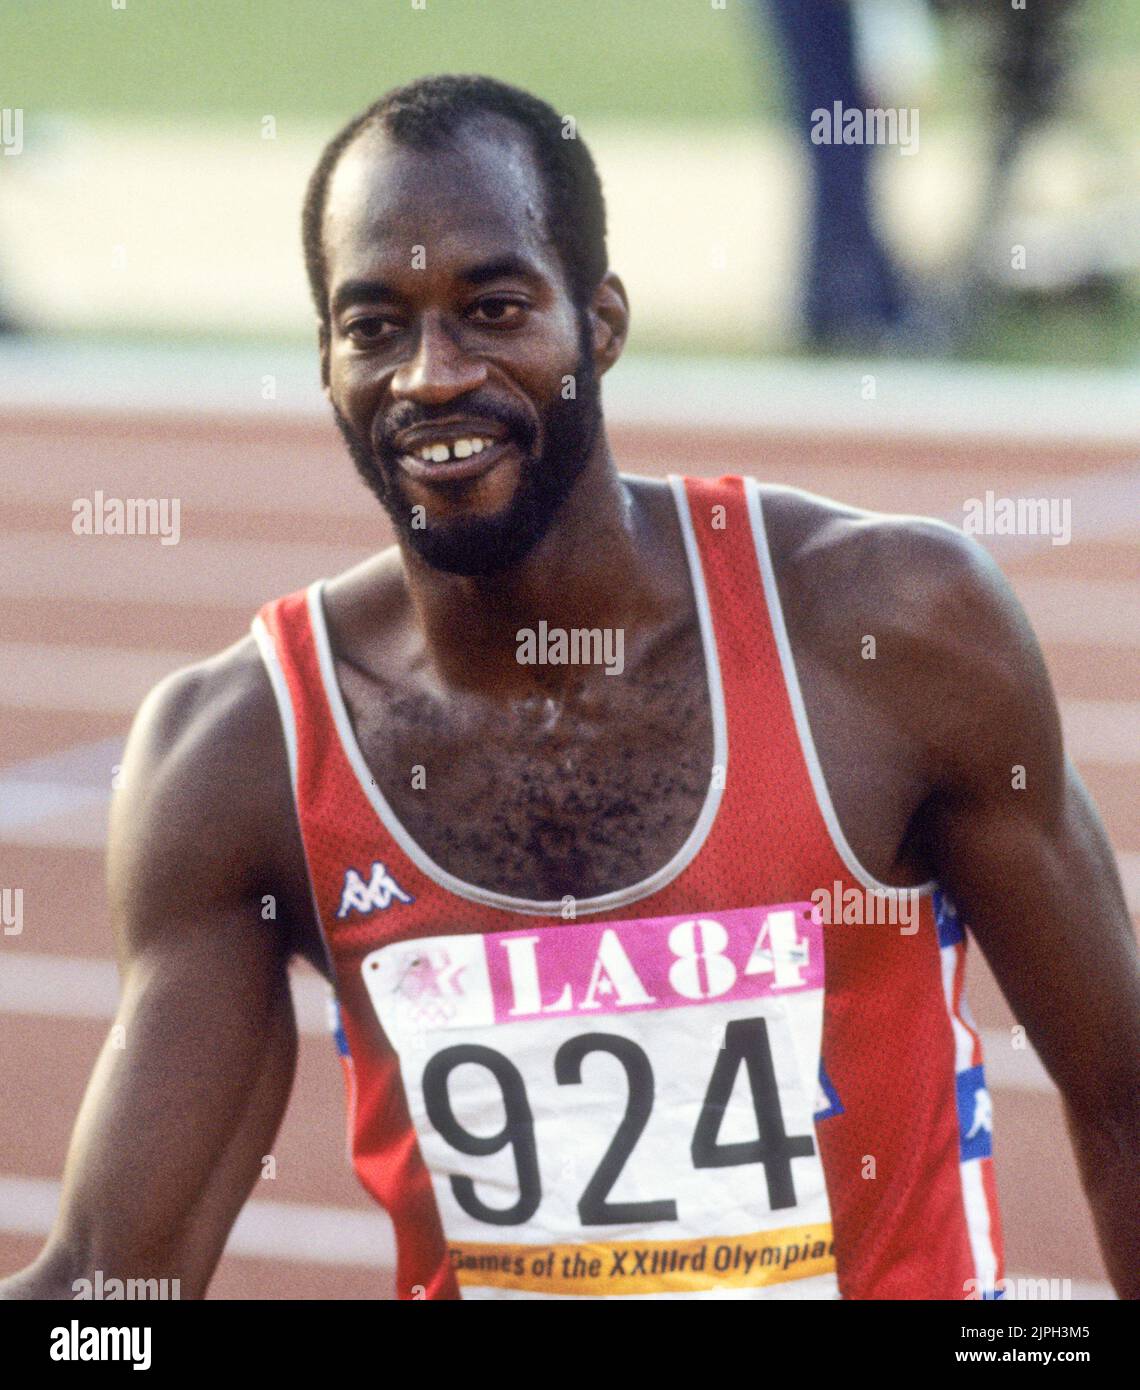 OLYMPISCHE SOMMERSPIELE IN LOS ANGELES 1984 EDWIN MOSES USA 400 M HÜRDE Stockfoto